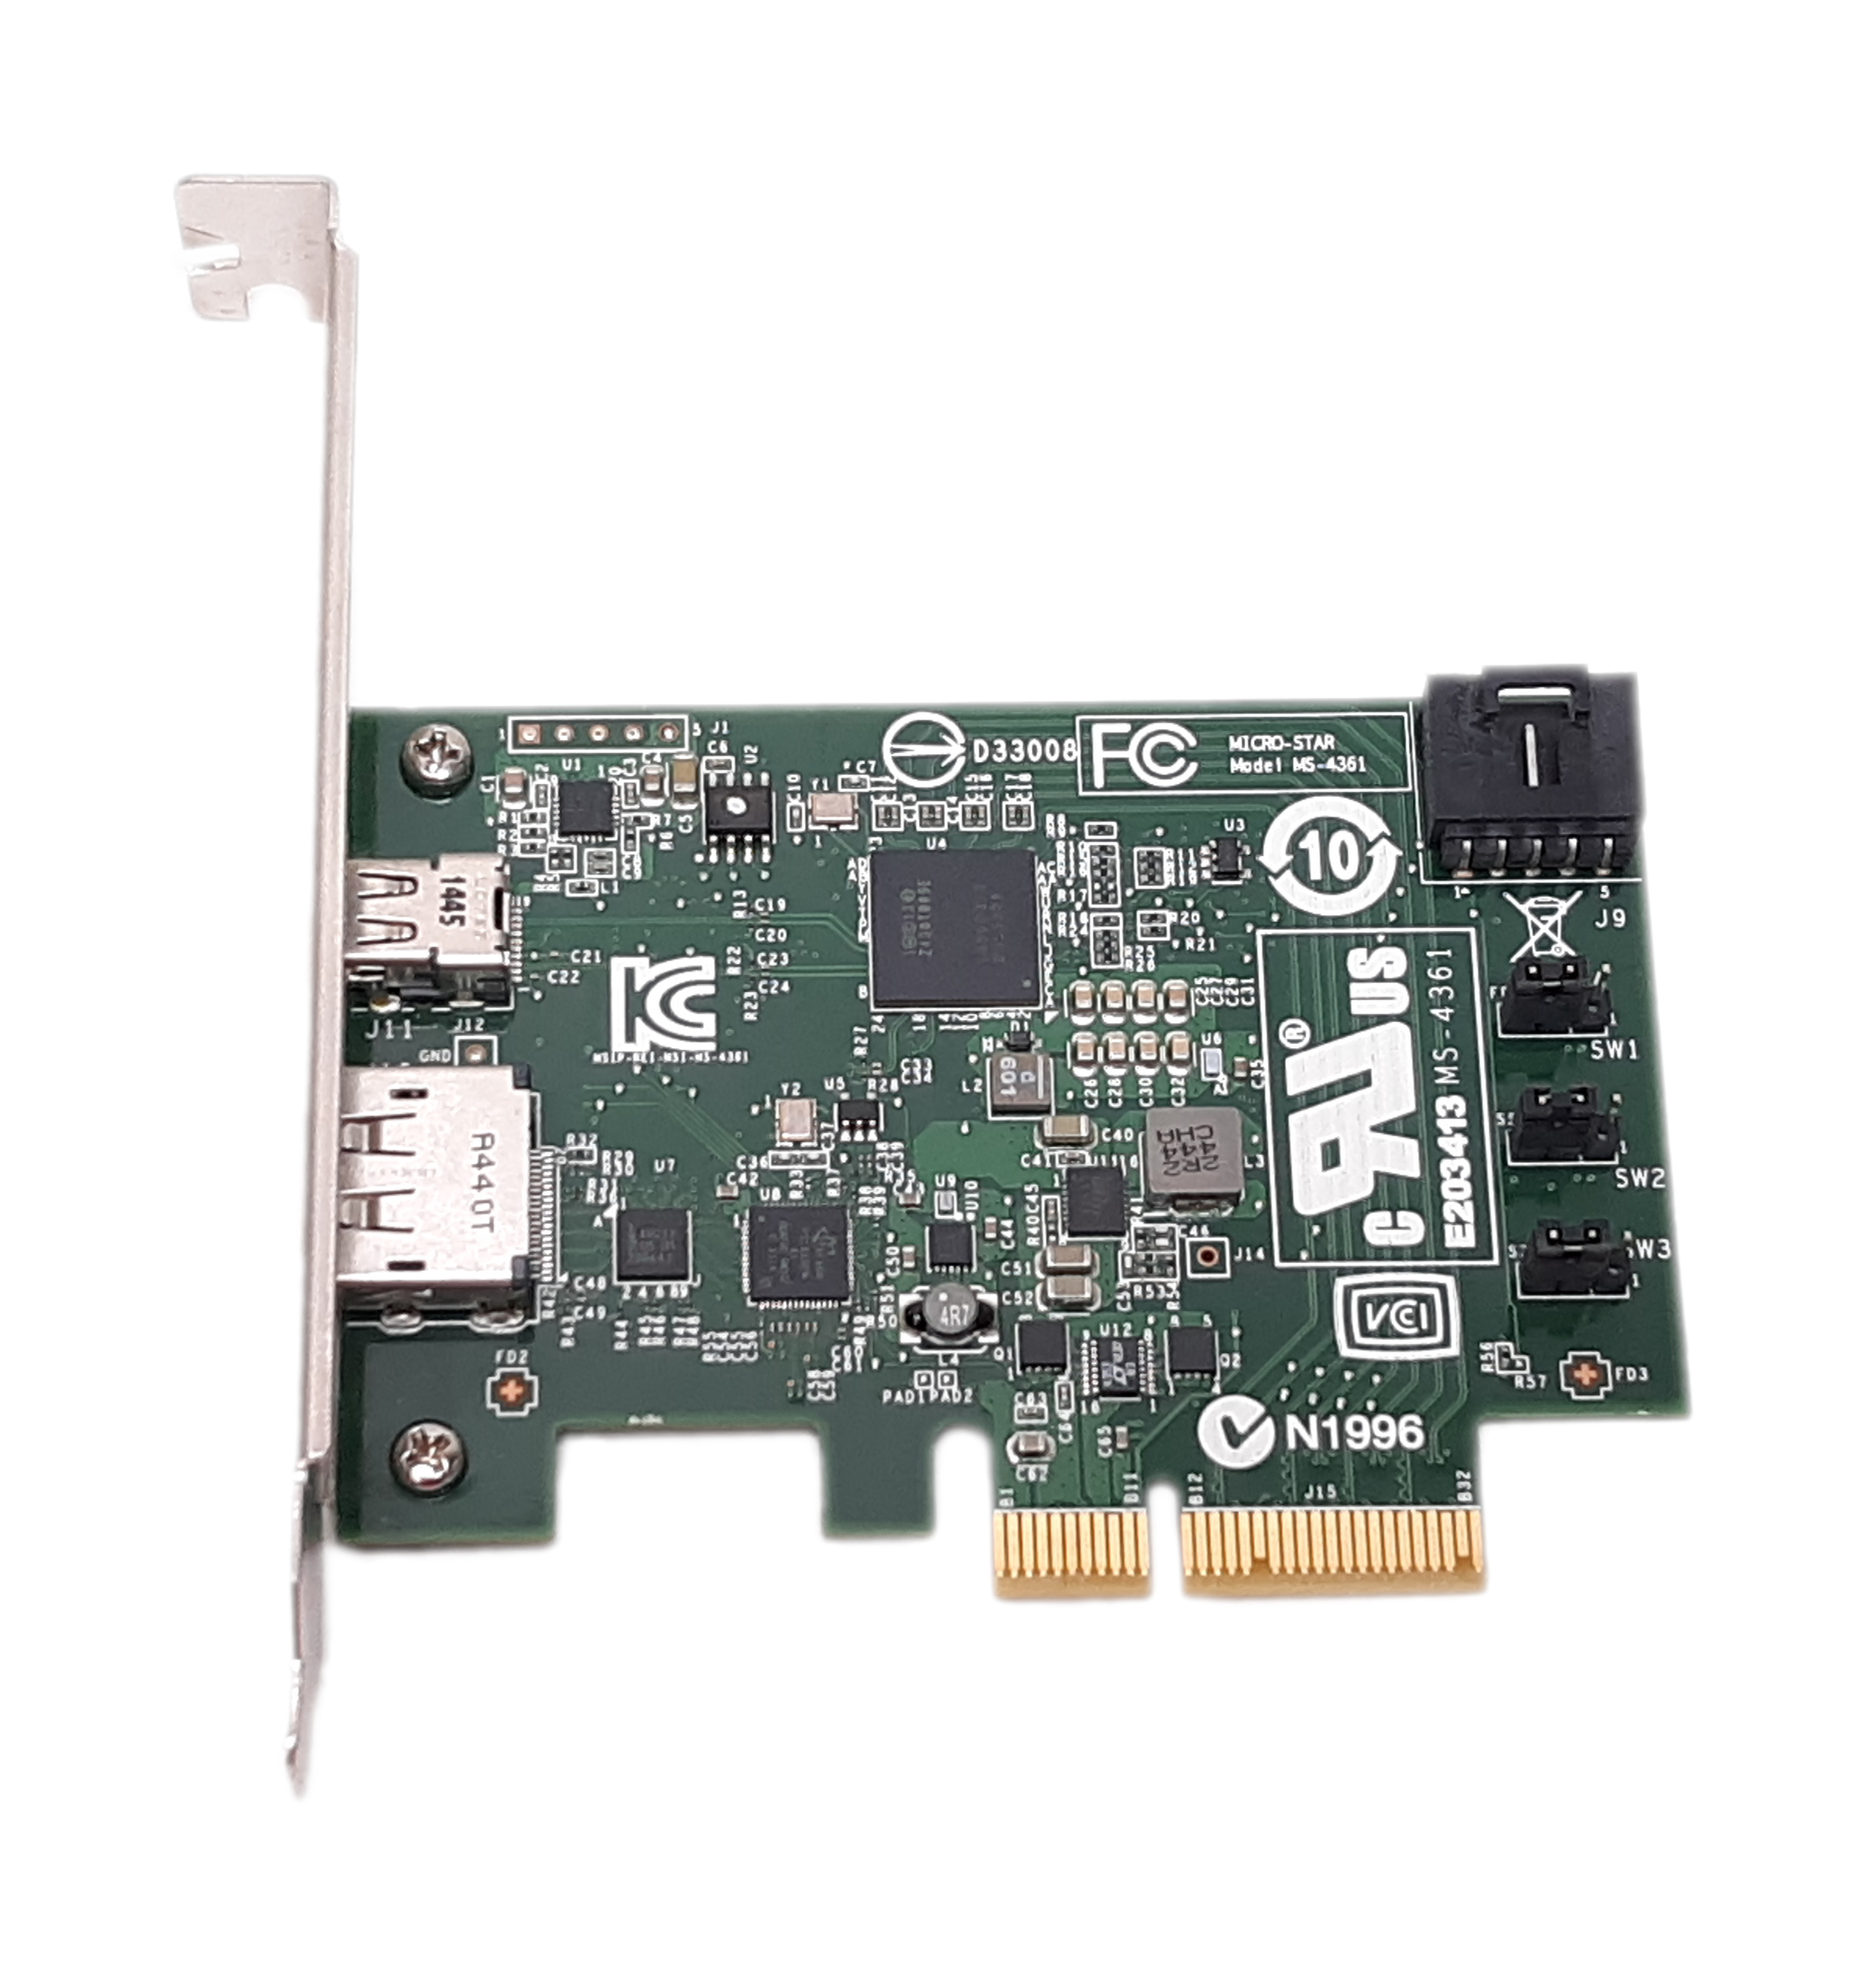 Dell Micro-Star MS-4361 Thunderbolt-2 Adapter DP to mini-DP PCIe x4 7HMPH